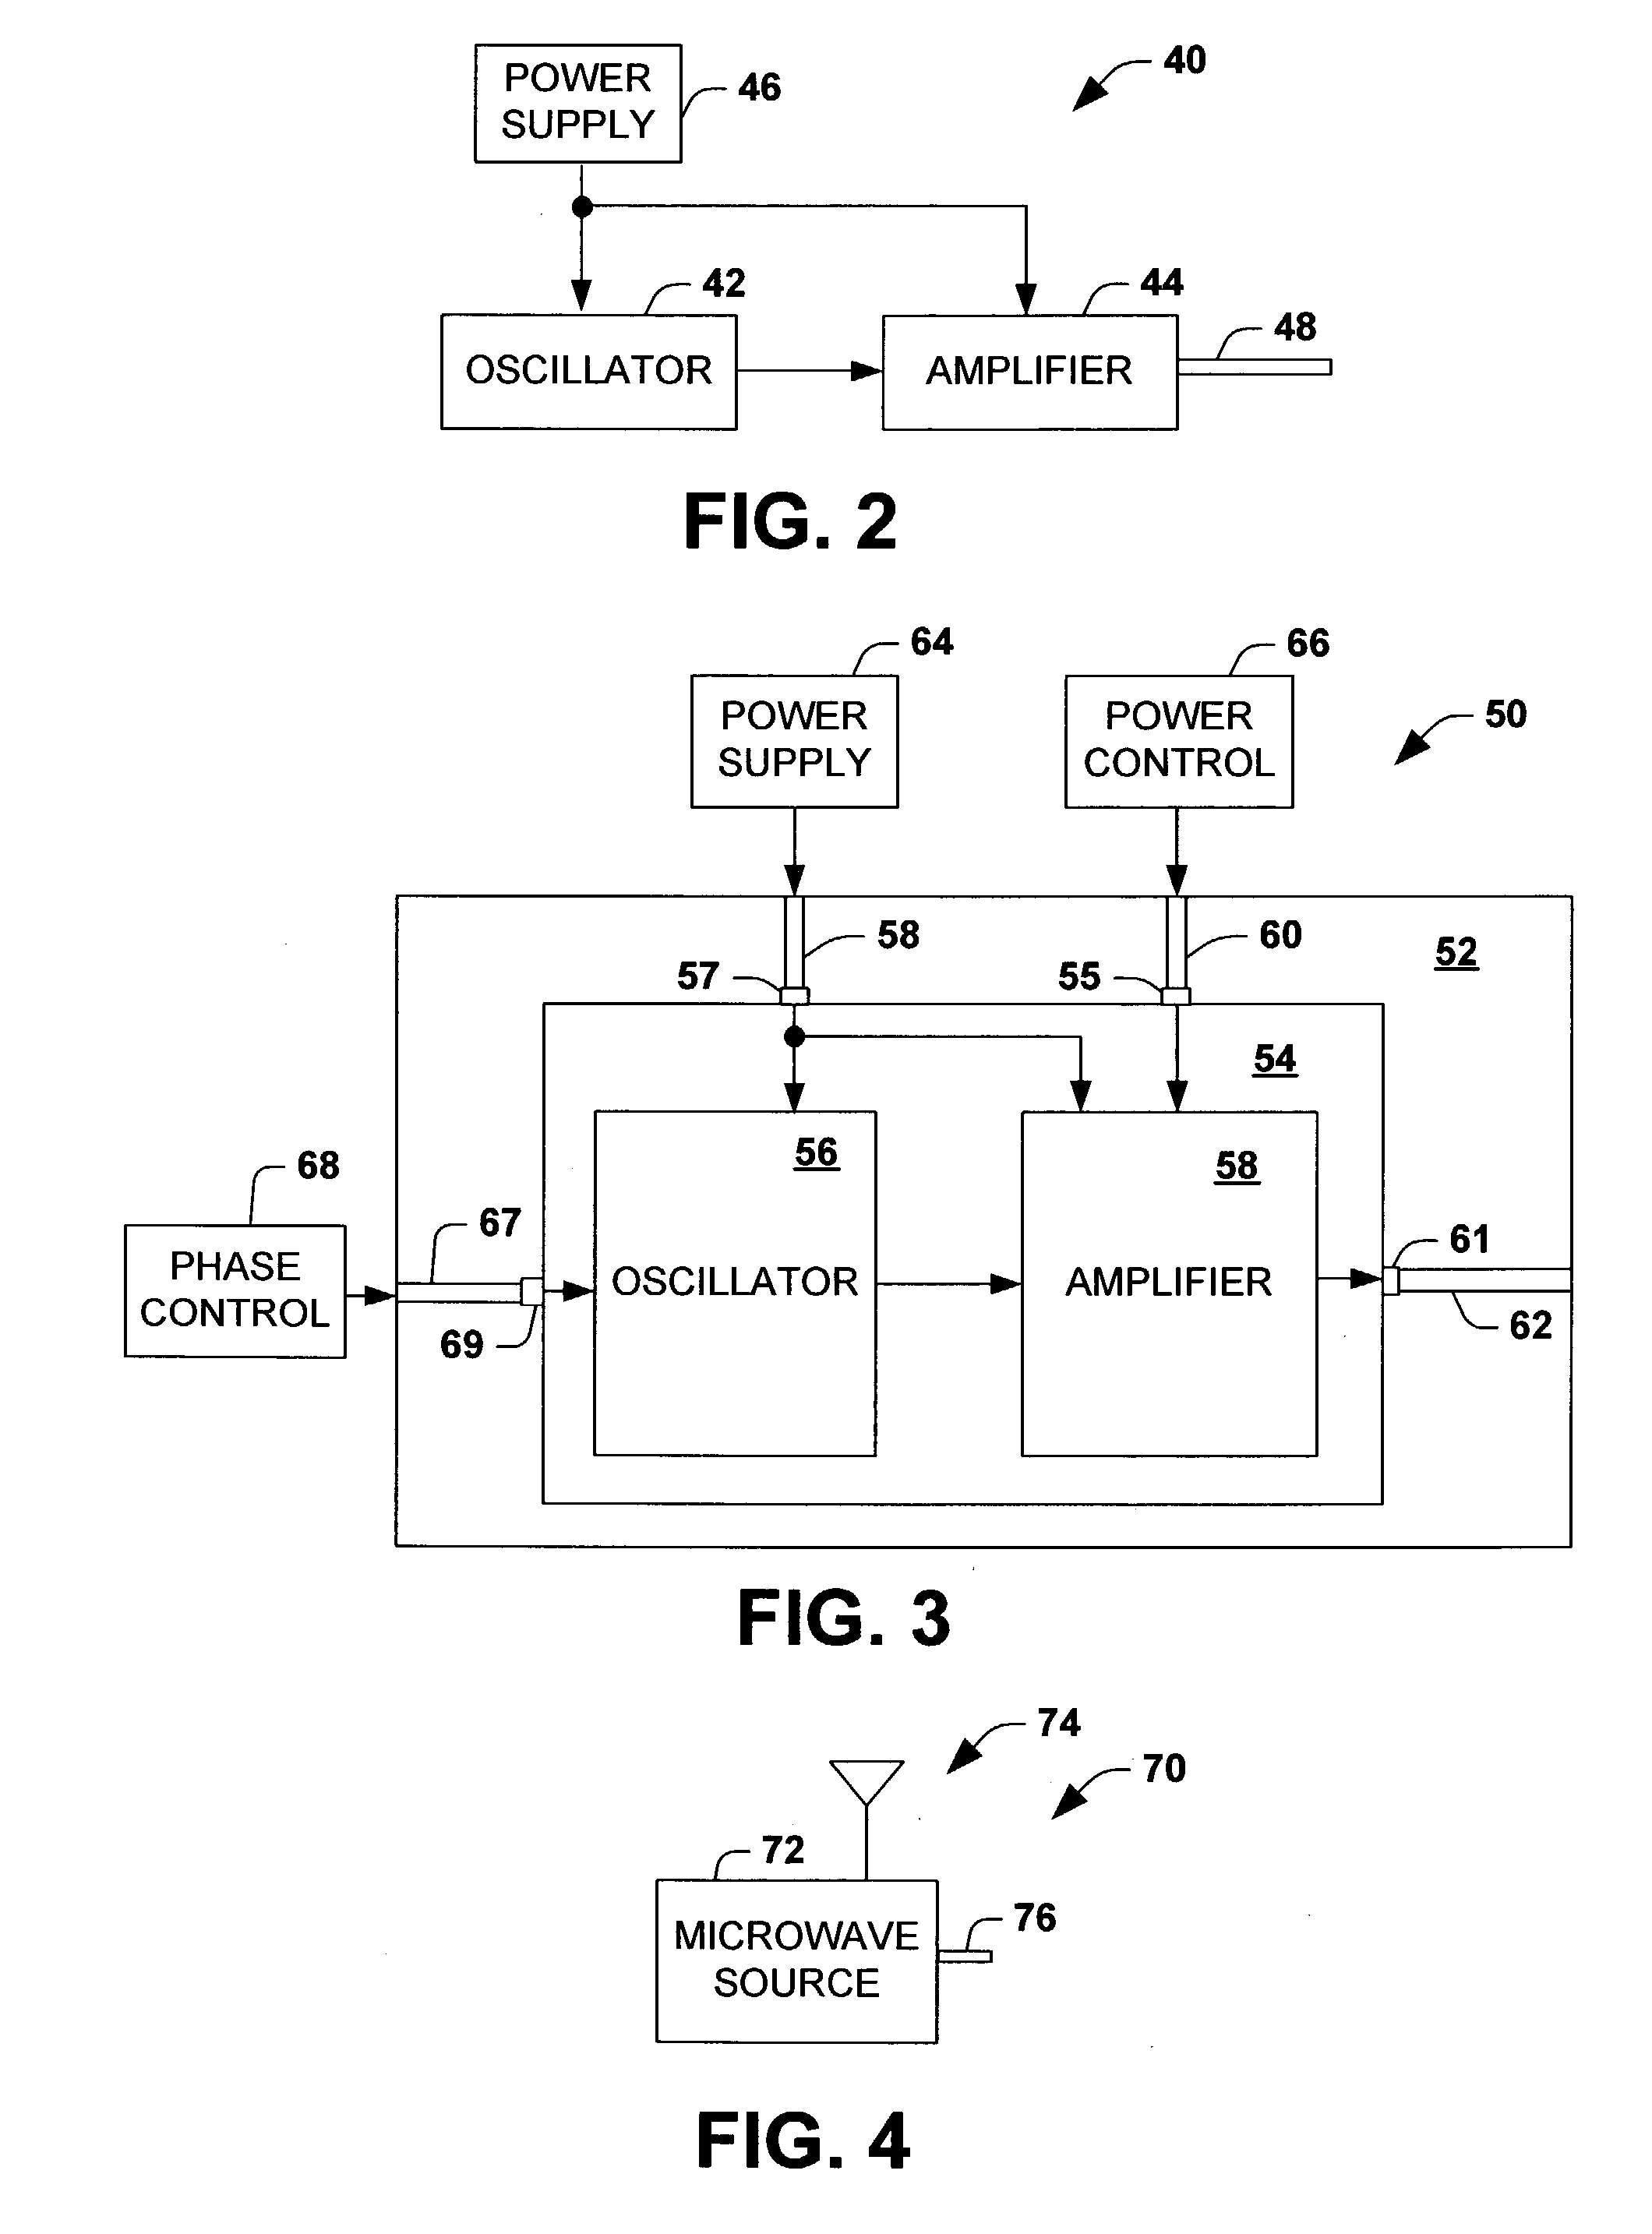 Microwave heating using distributed semiconductor sources